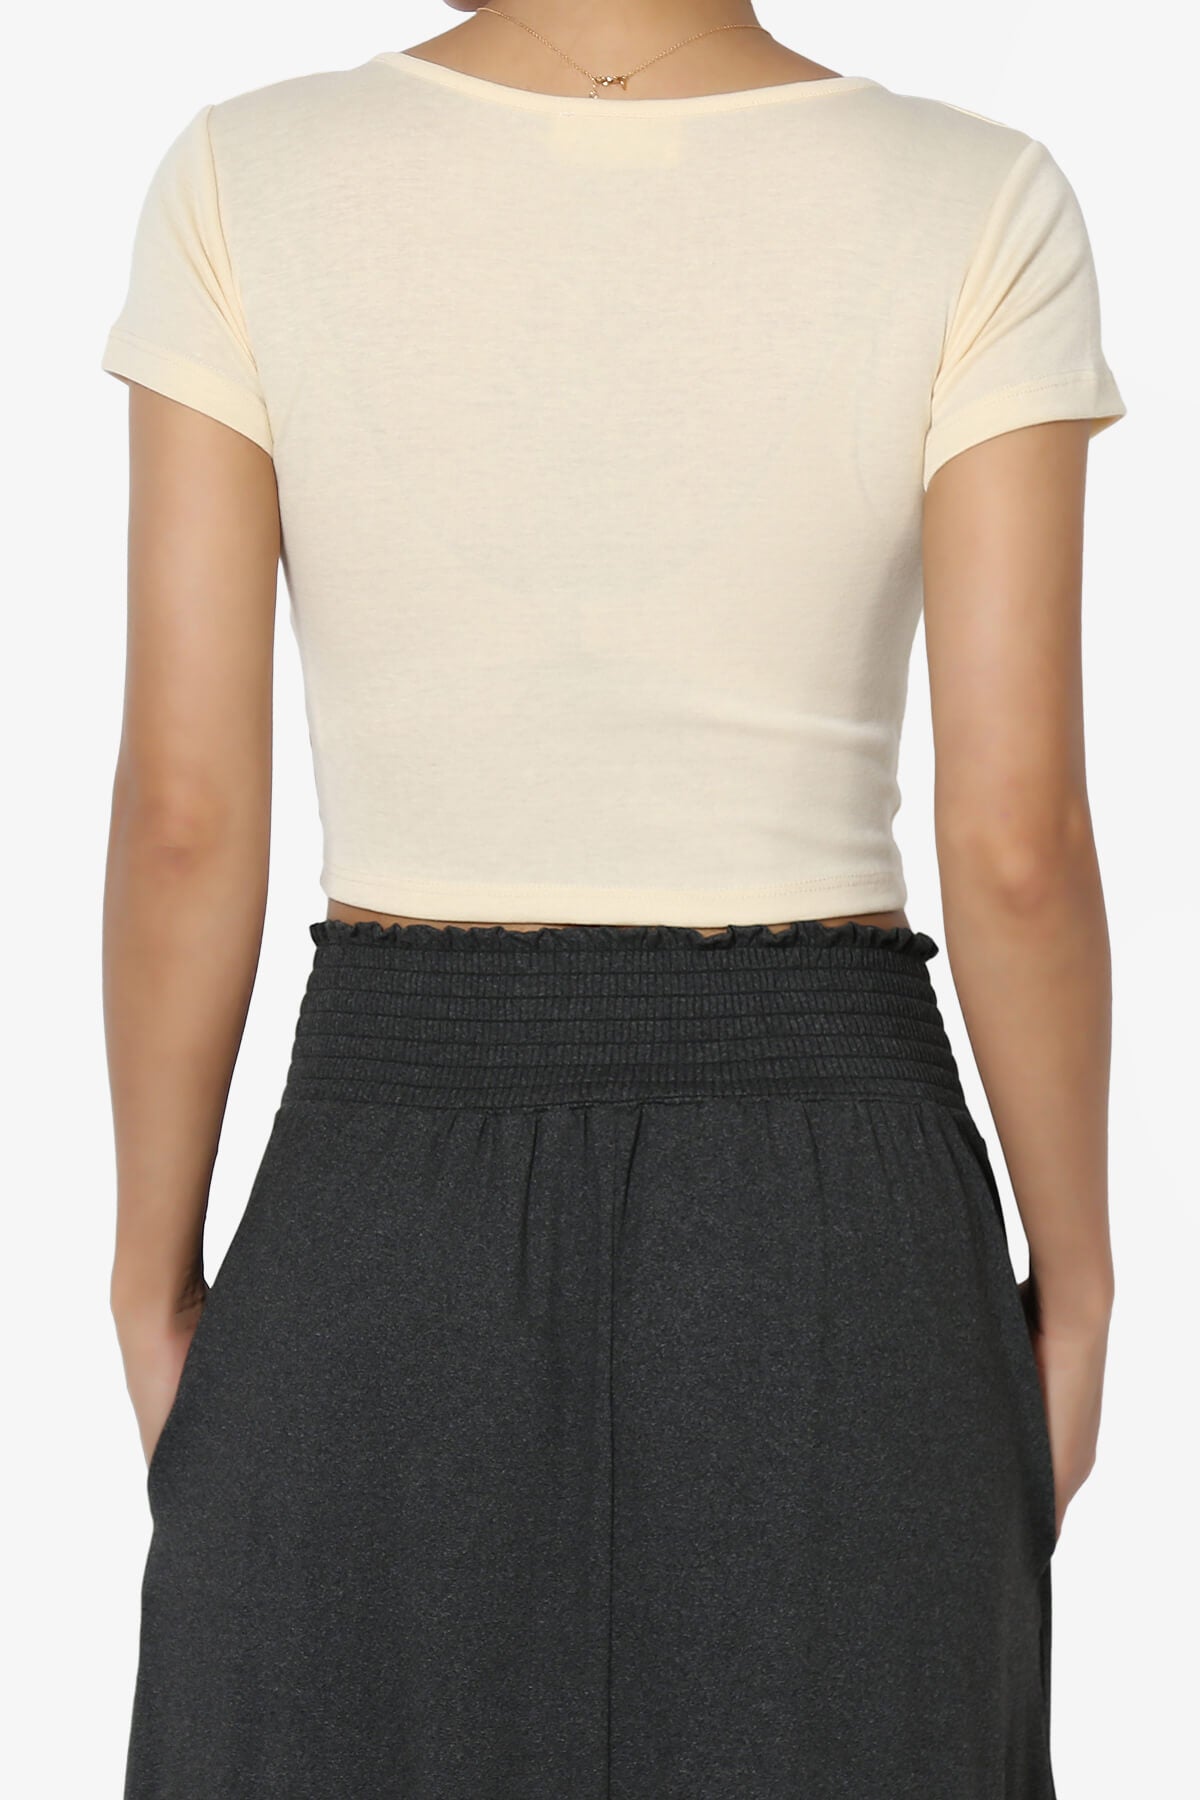 Solly Square Neck Short Sleeve Crop T-Shirt CREAM_2